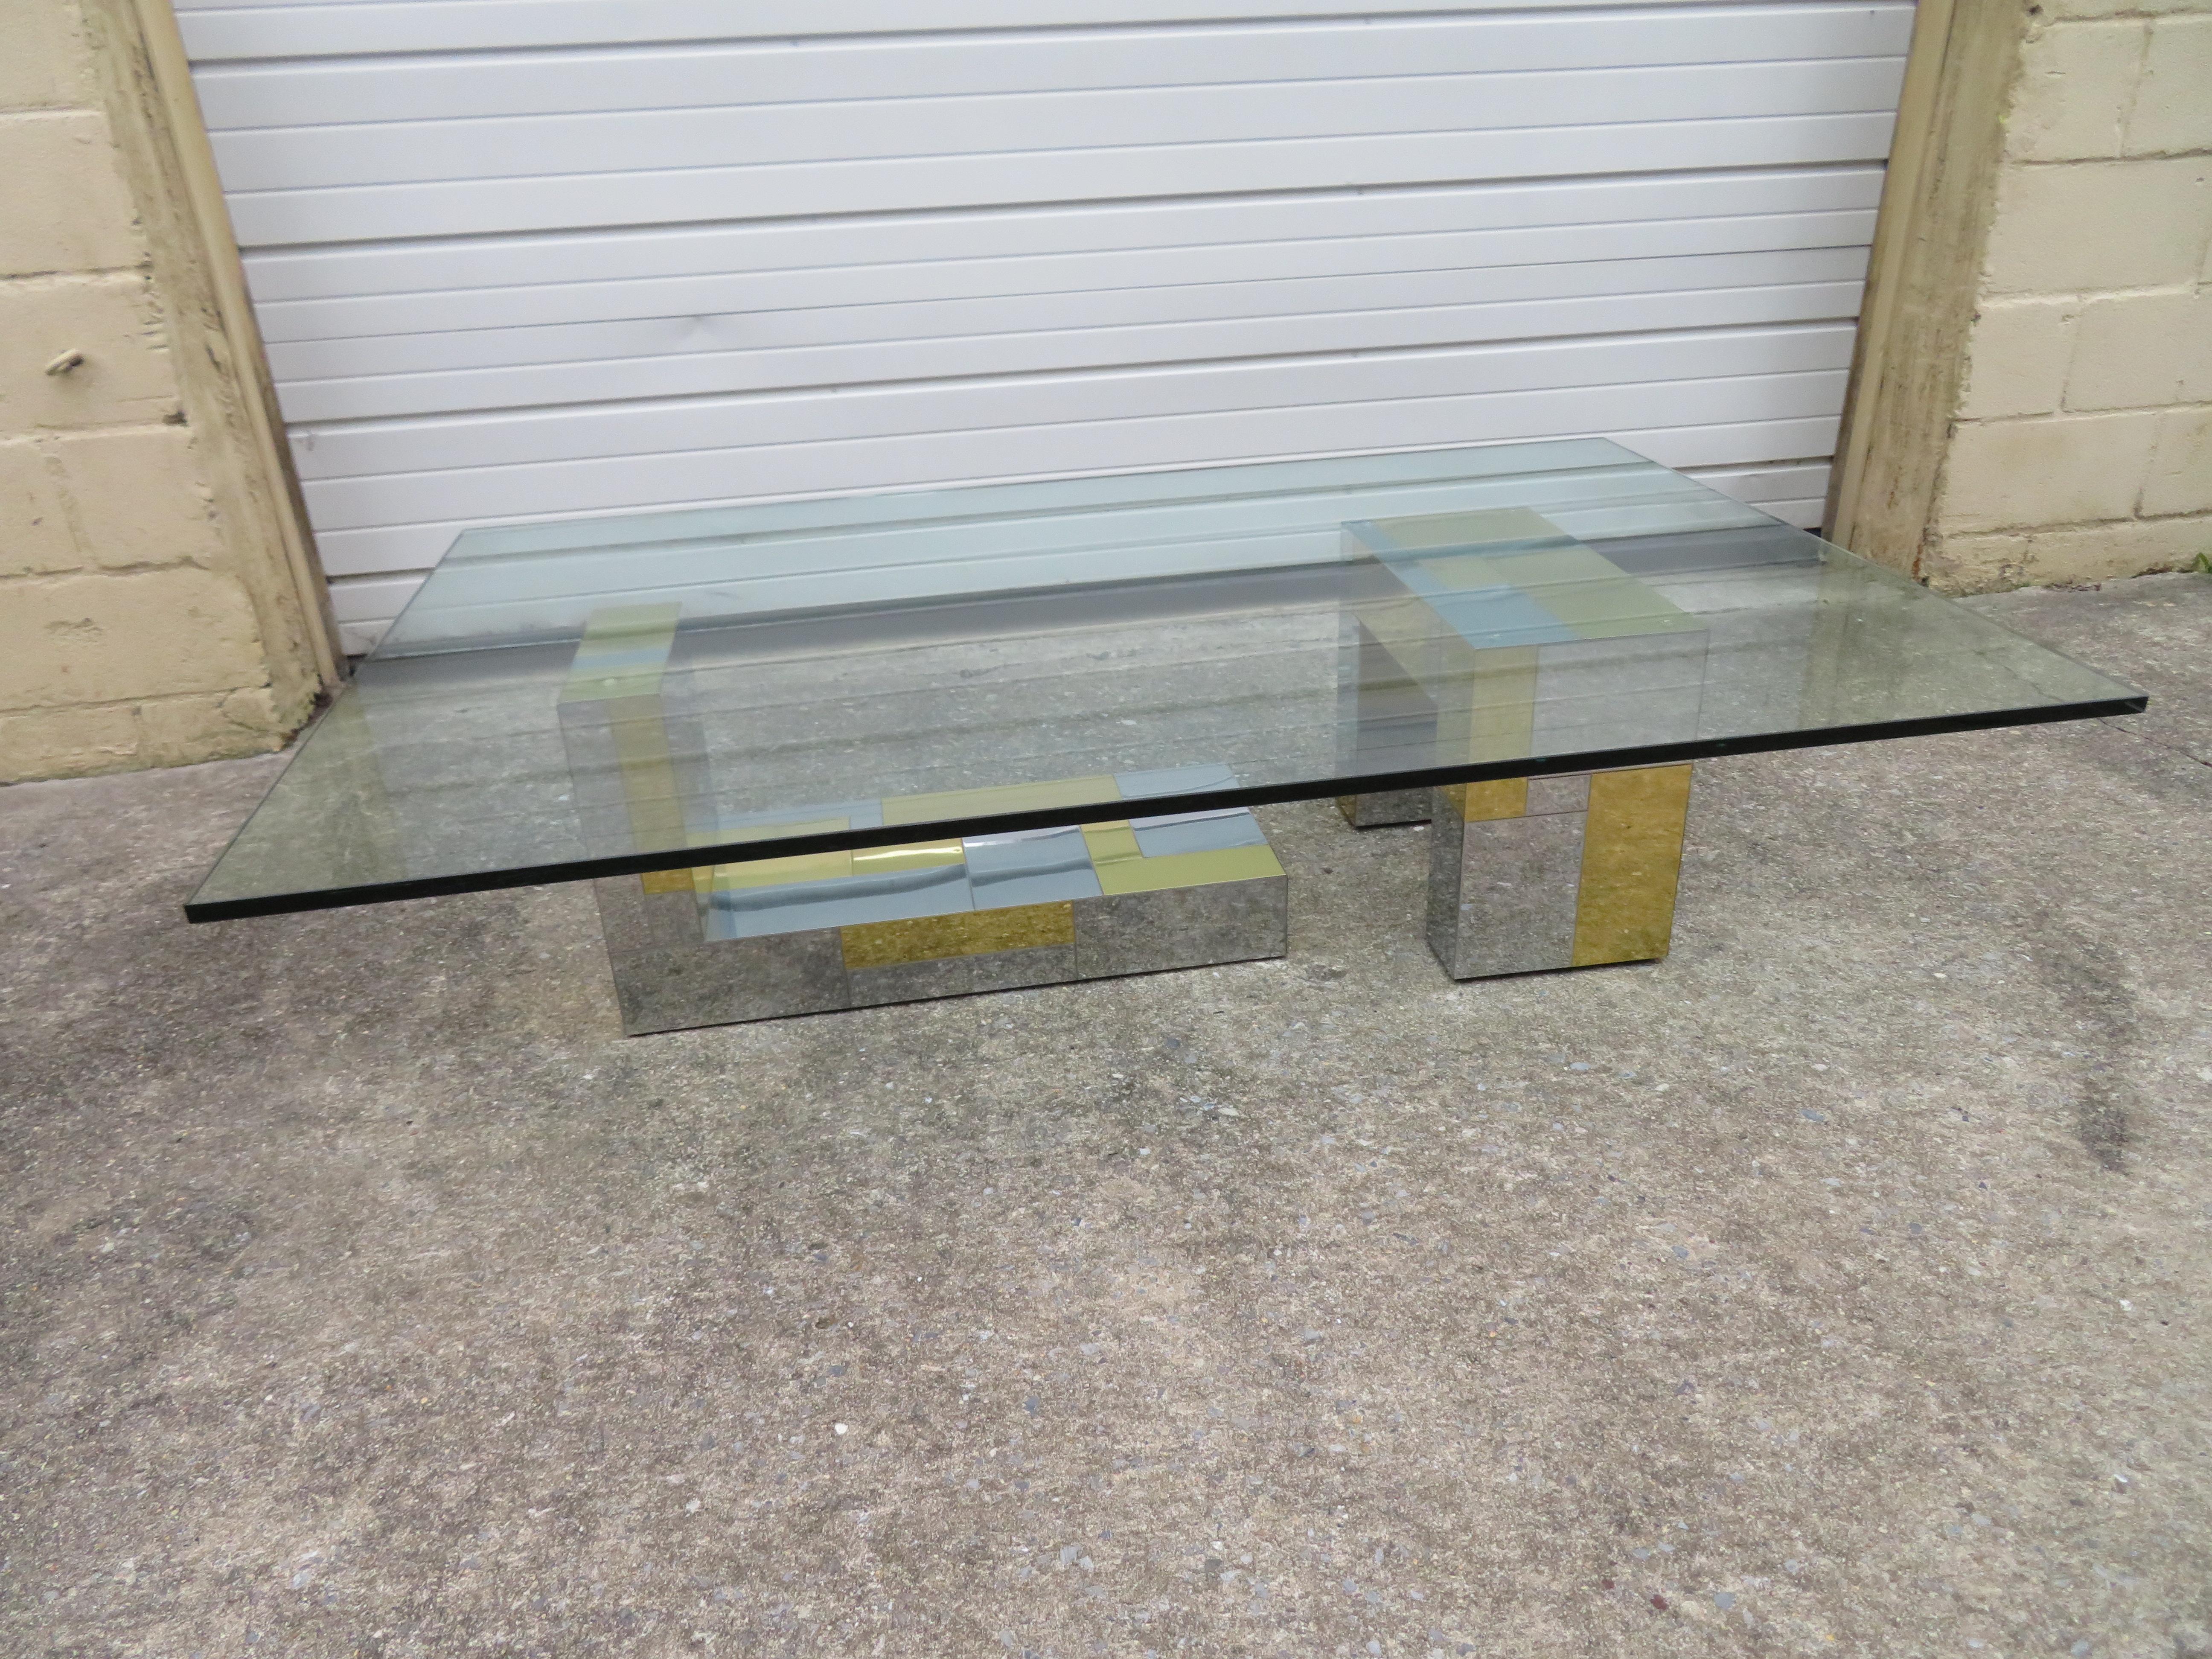 Fabulous Paul Evans for Directional brass and chromed steel coffee table consisting of two sculptural bases supporting an over sized glass top. This particular table is not signed but the original owner did have the original catalog photo from